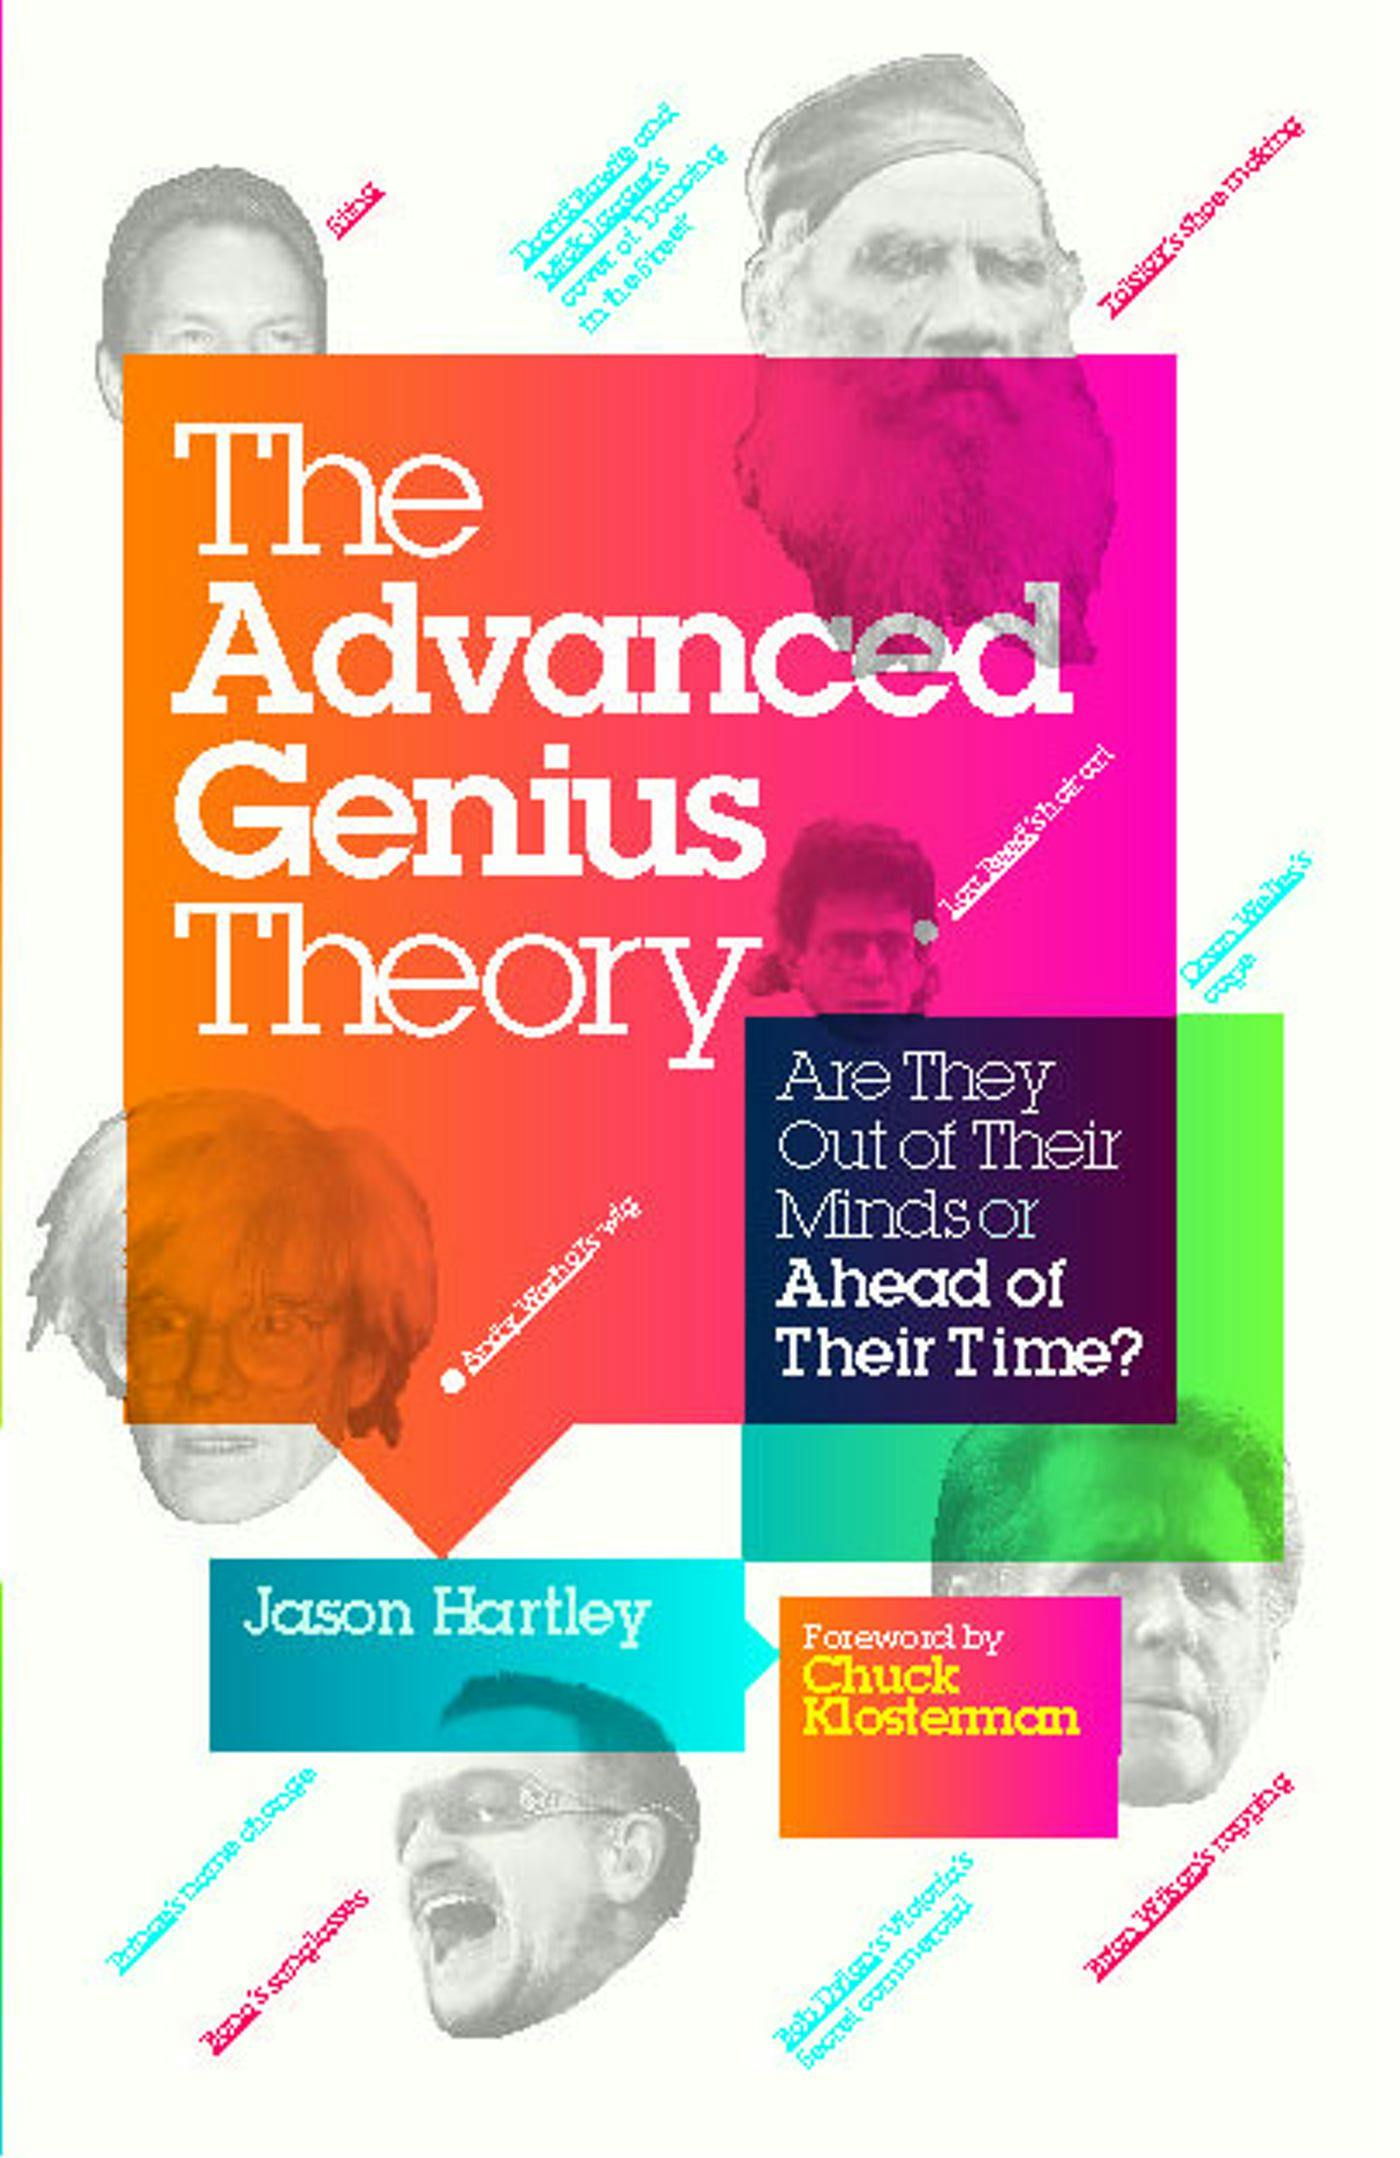 The Advanced Genius Theory: Are They Out of Their Minds or Ahead of Their Time? - Jason Hartley